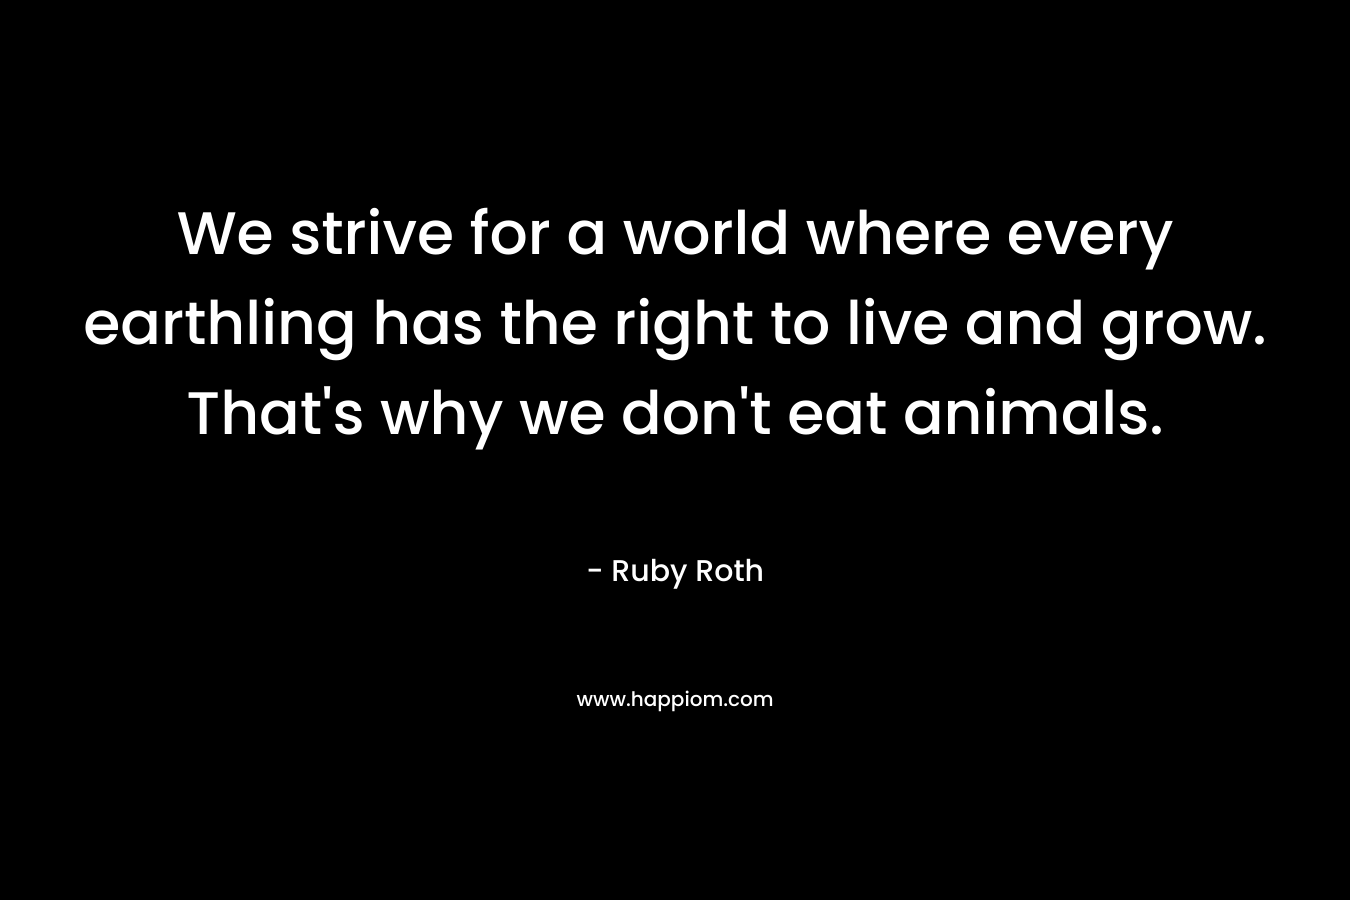 We strive for a world where every earthling has the right to live and grow. That’s why we don’t eat animals. – Ruby Roth